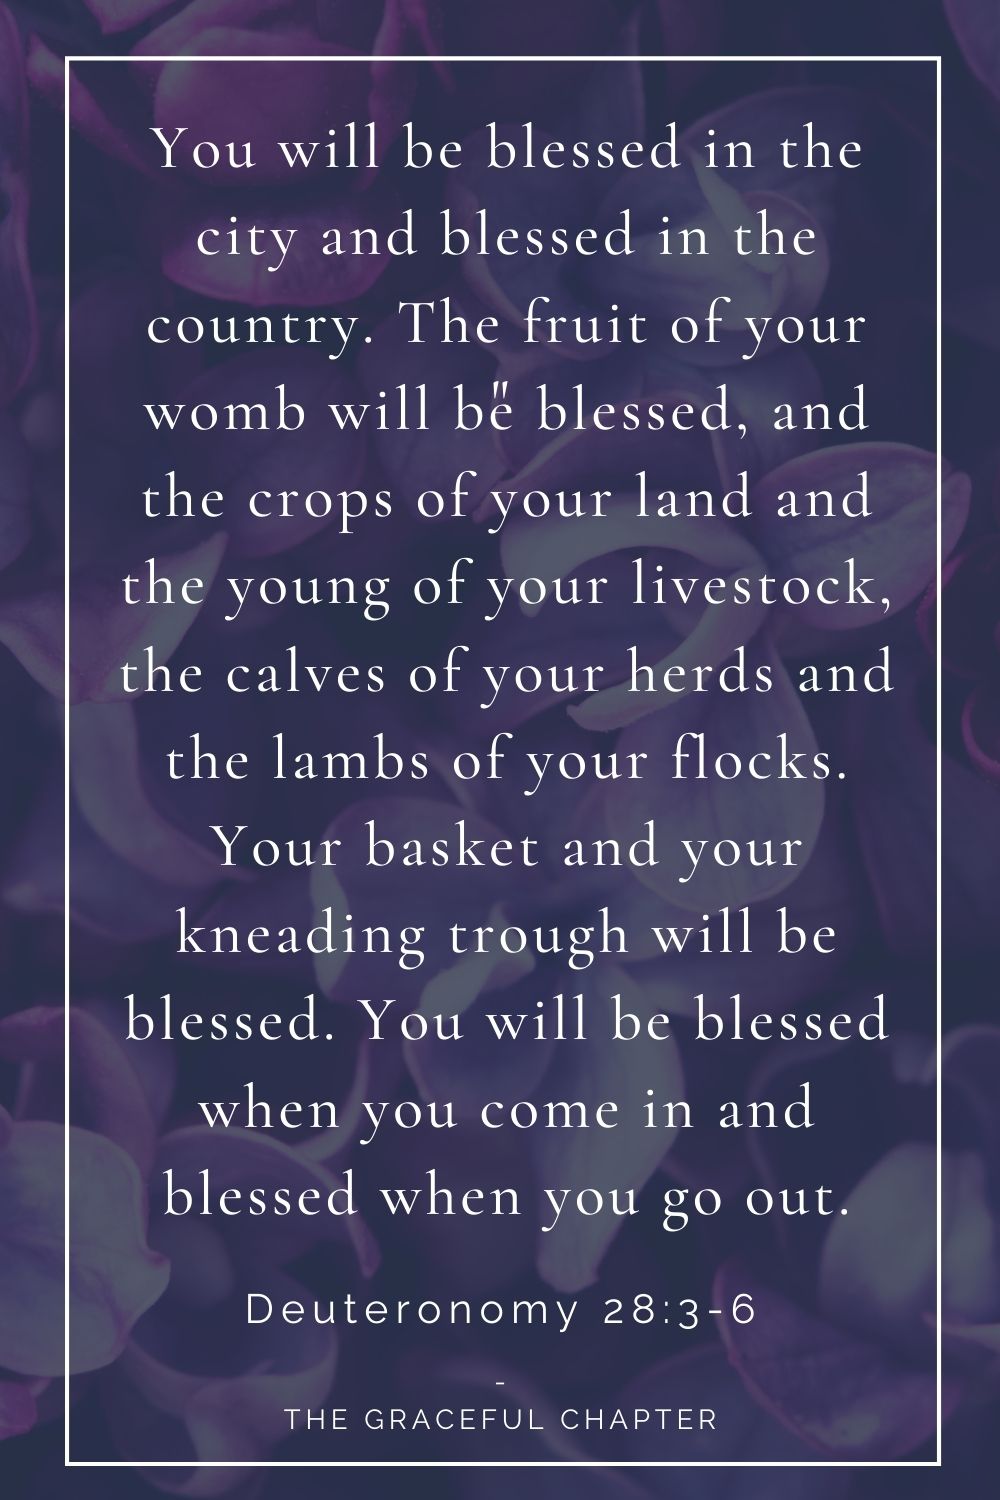 You will be blessed in the city and blessed in the country. The fruit of your womb will be blessed, and the crops of your land and the young of your livestock, the calves of your herds and the lambs of your flocks. Your basket and your kneading trough will be blessed. You will be blessed when you come in and blessed when you go out. Deuteronomy 28:3-6